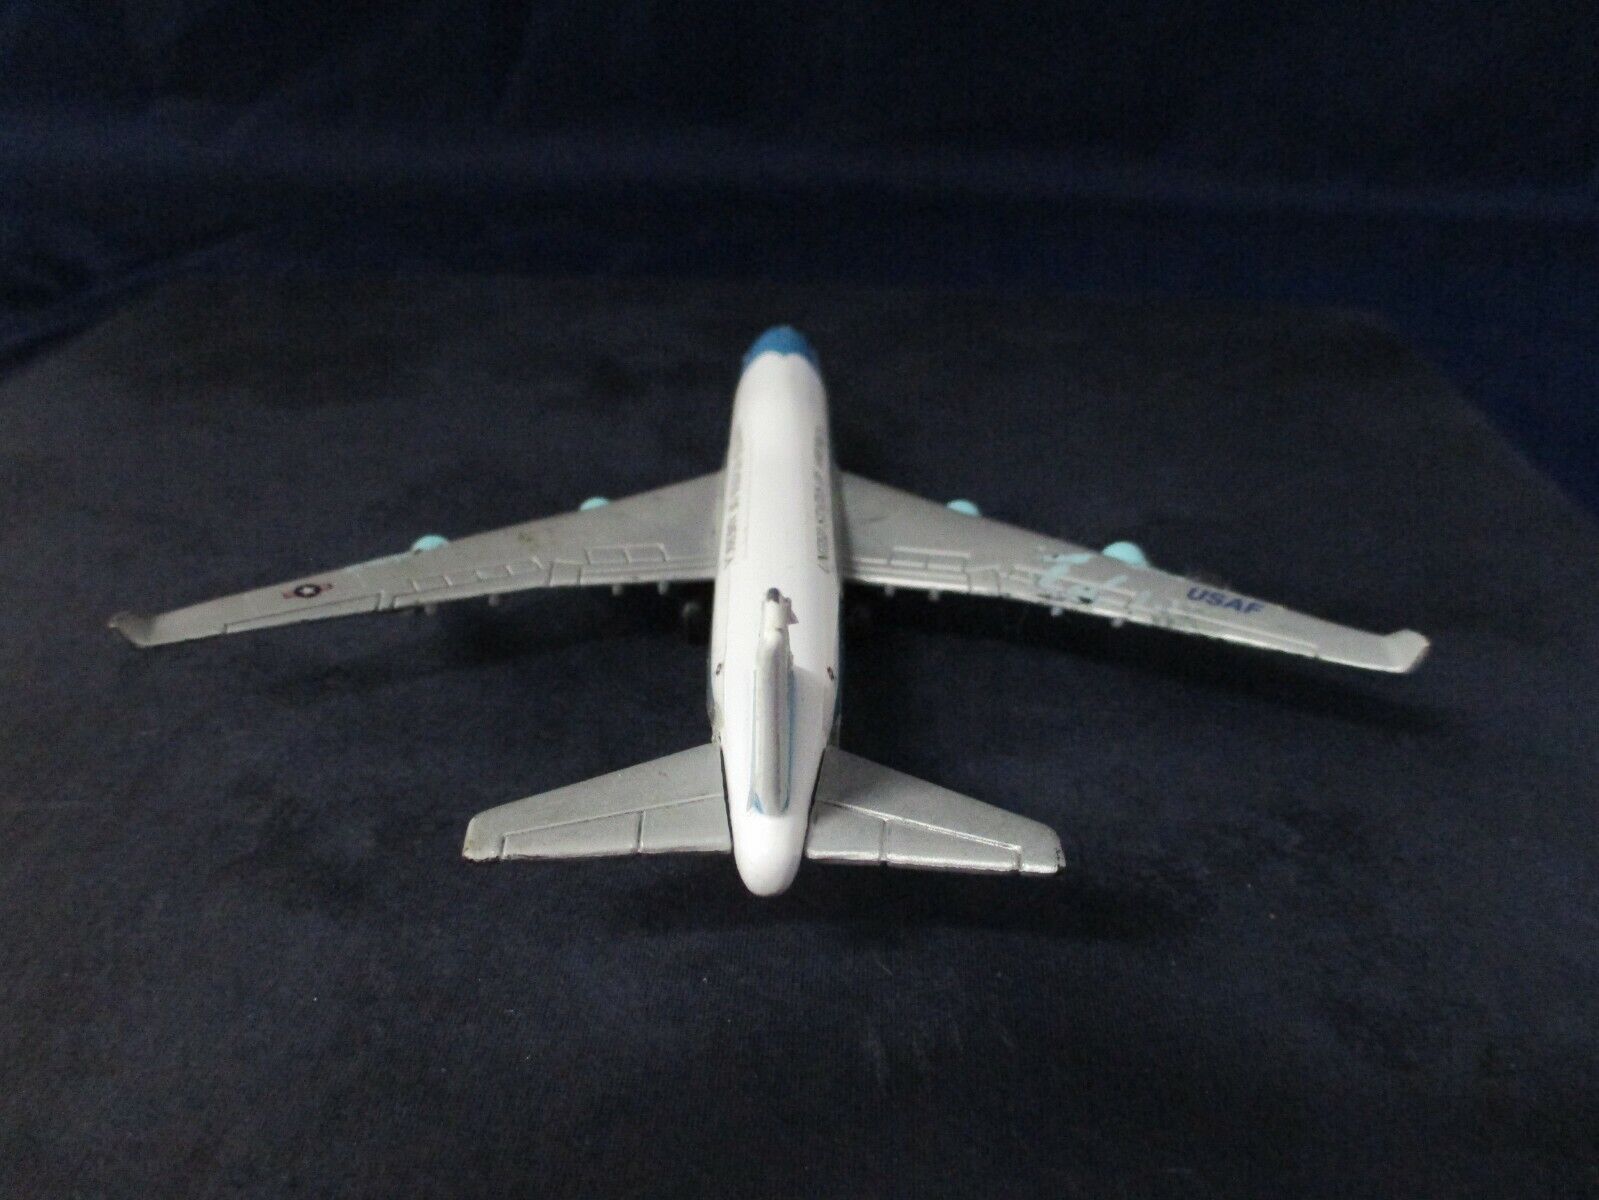 Real Toy USAF United States of America Plane Airforce 1  President Plane